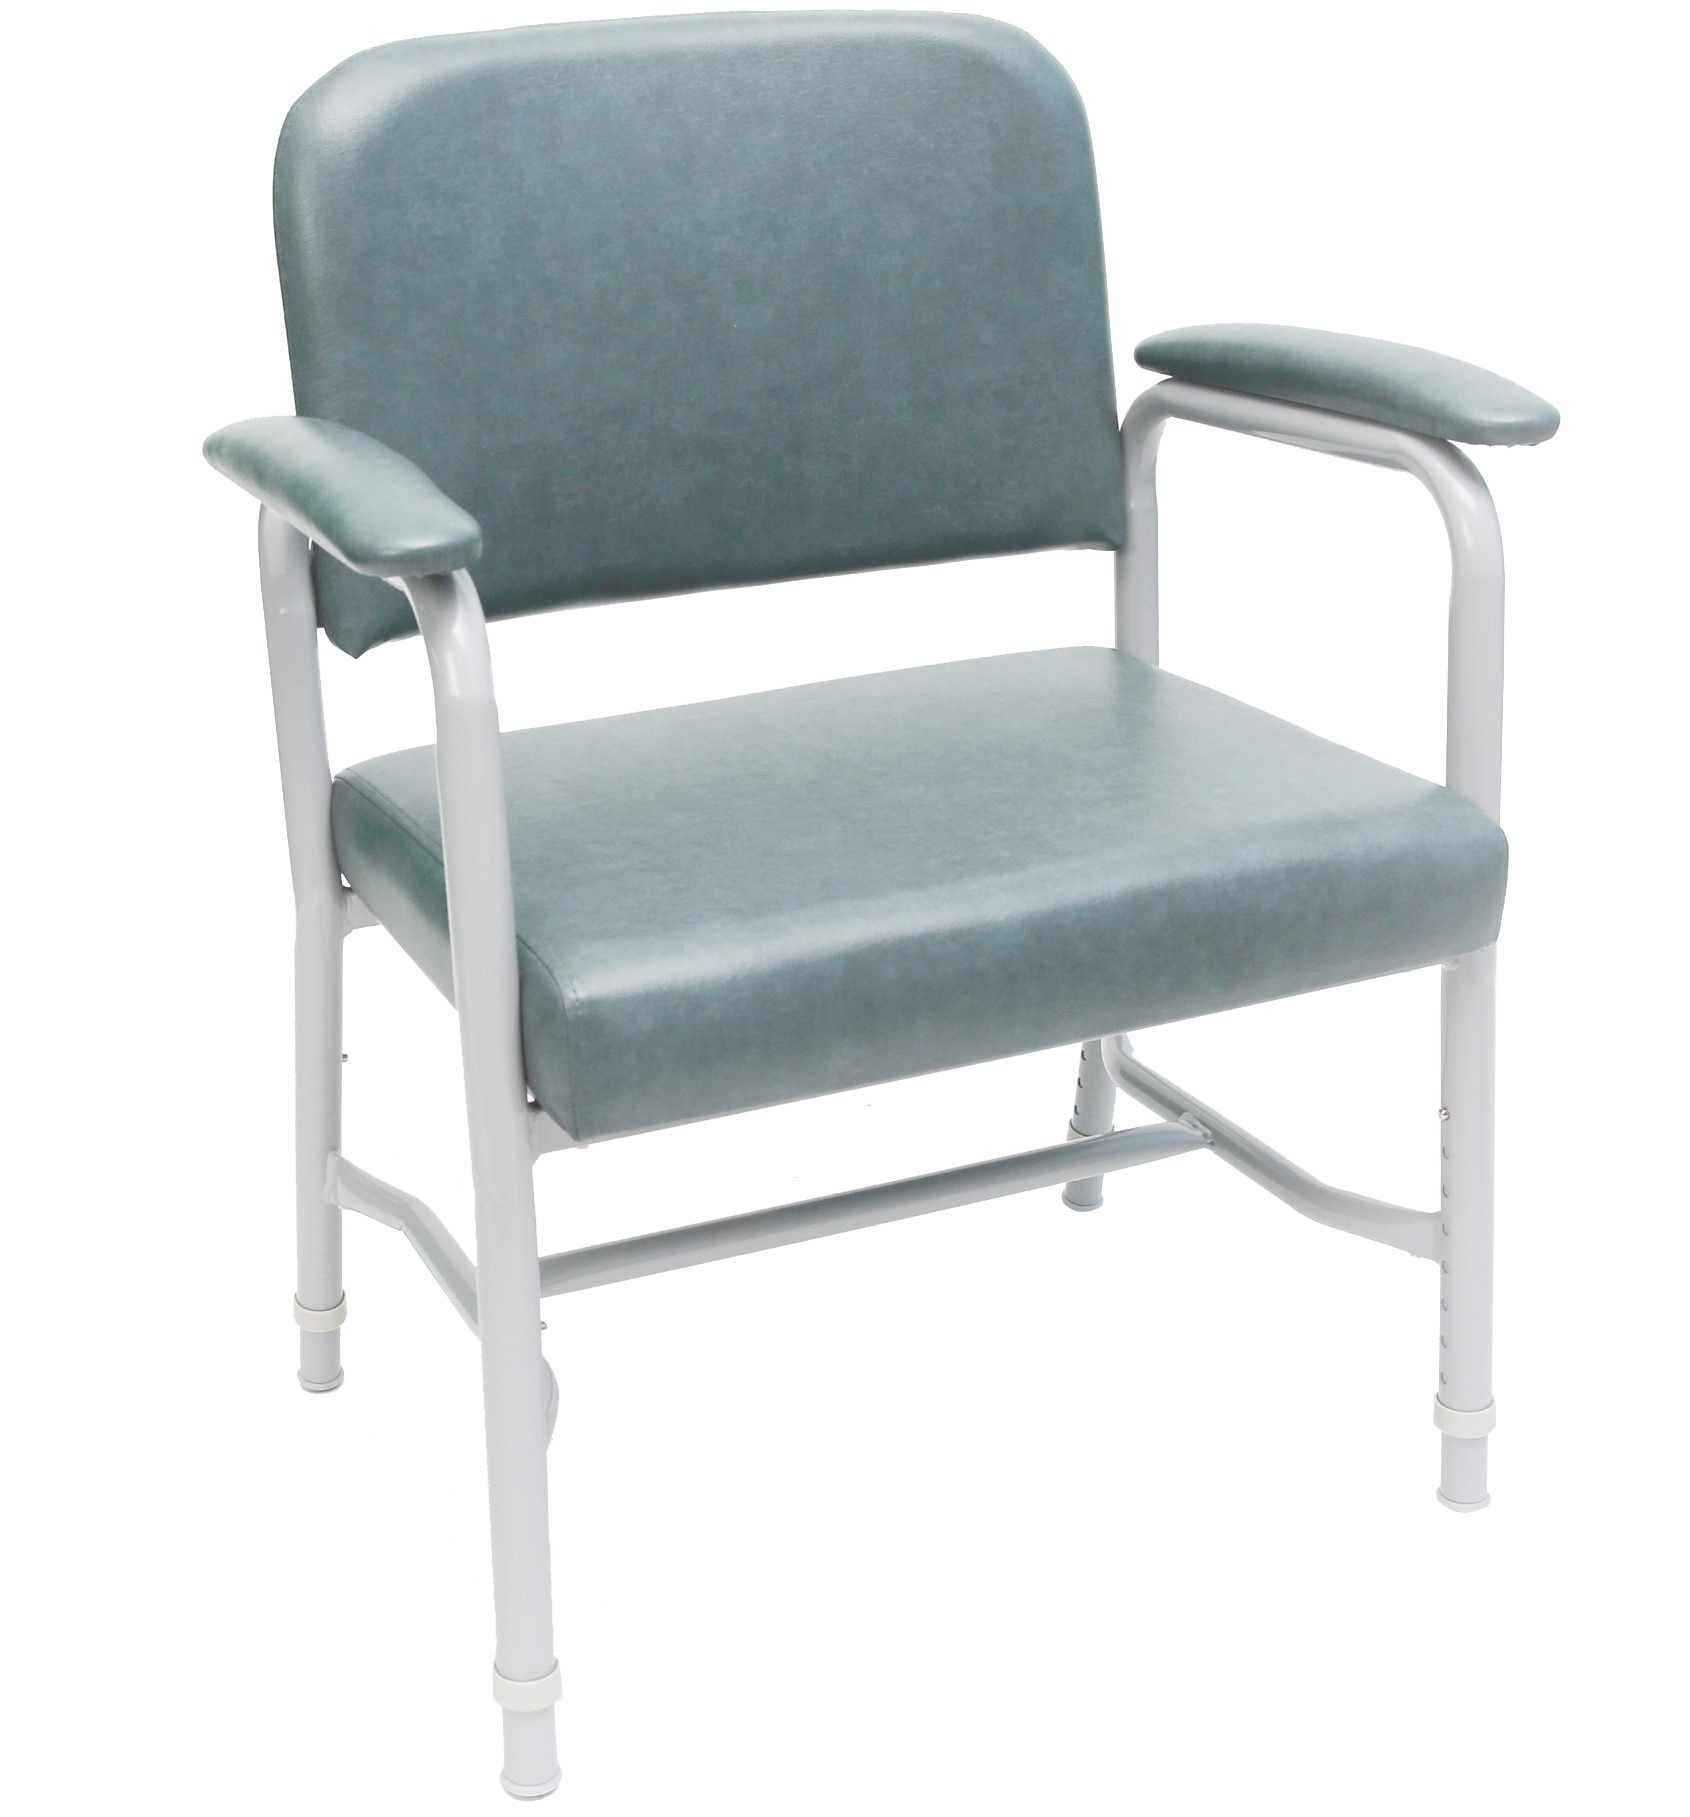 Bariatric Low Back Chair